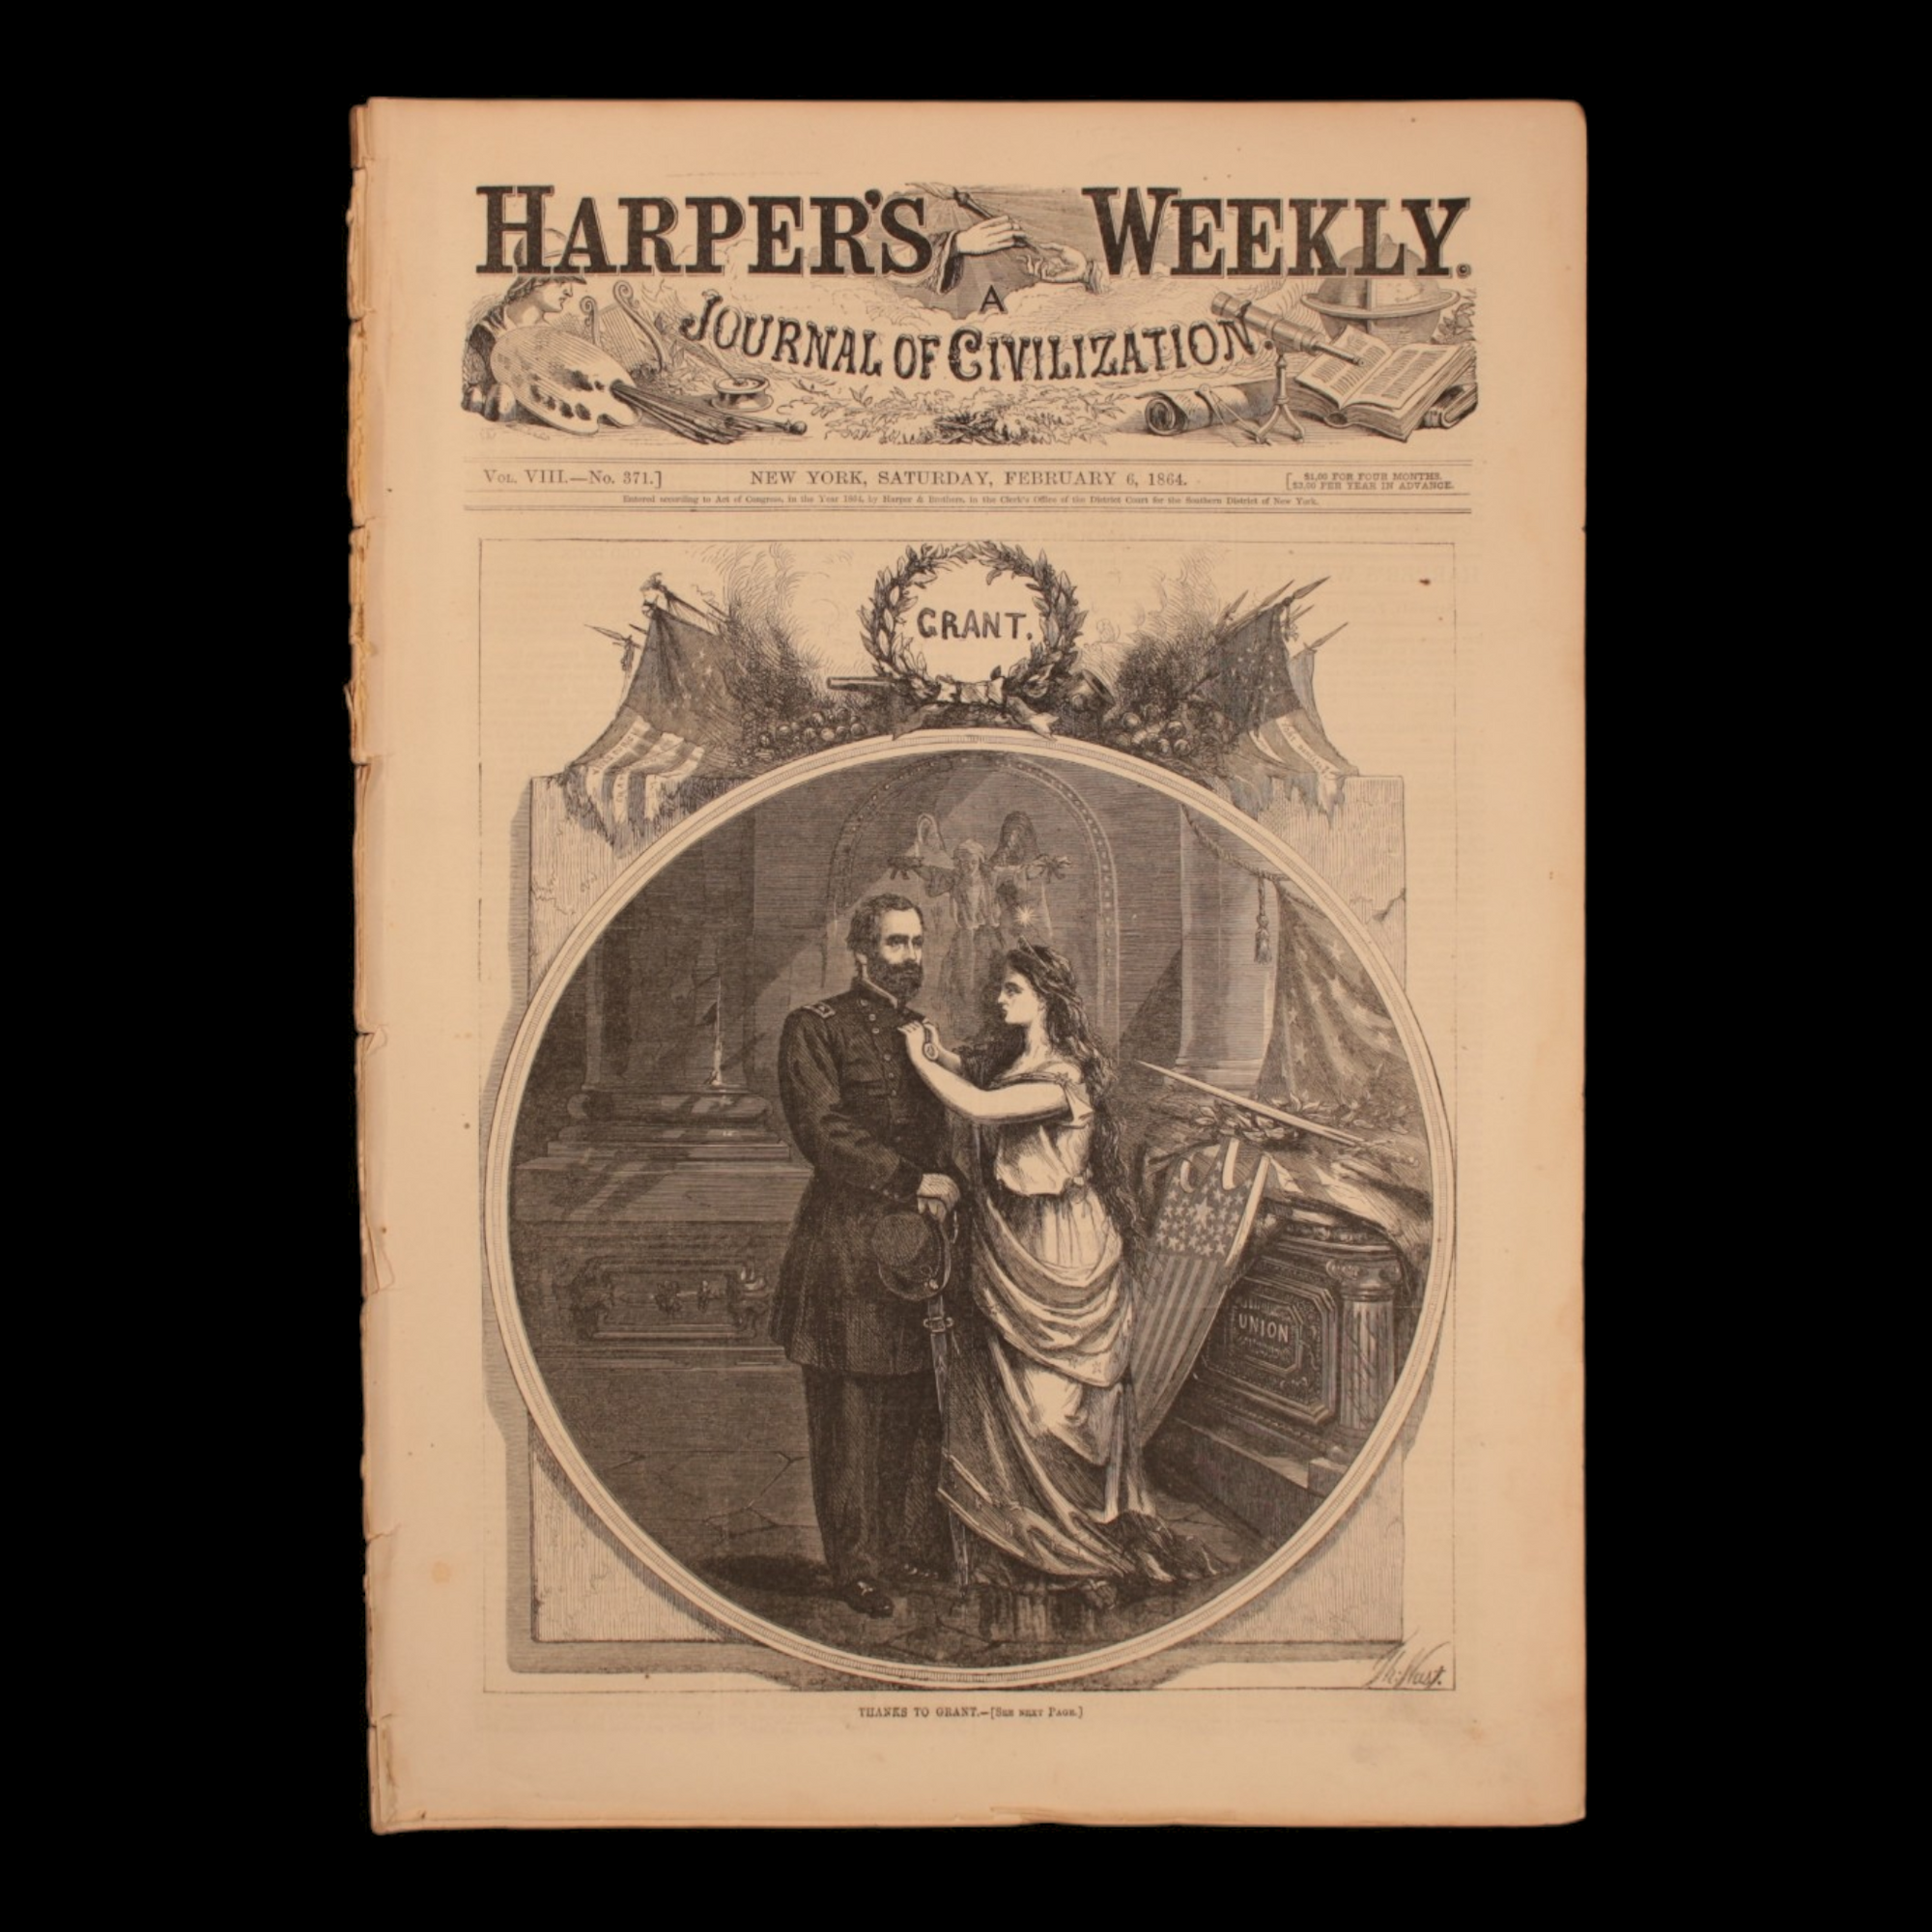 Harper's Weekly — Ulysses S. Grant & Liberty Cover, John Clem Biography (12 Year Old Sergeant), Wagon Train Engraving